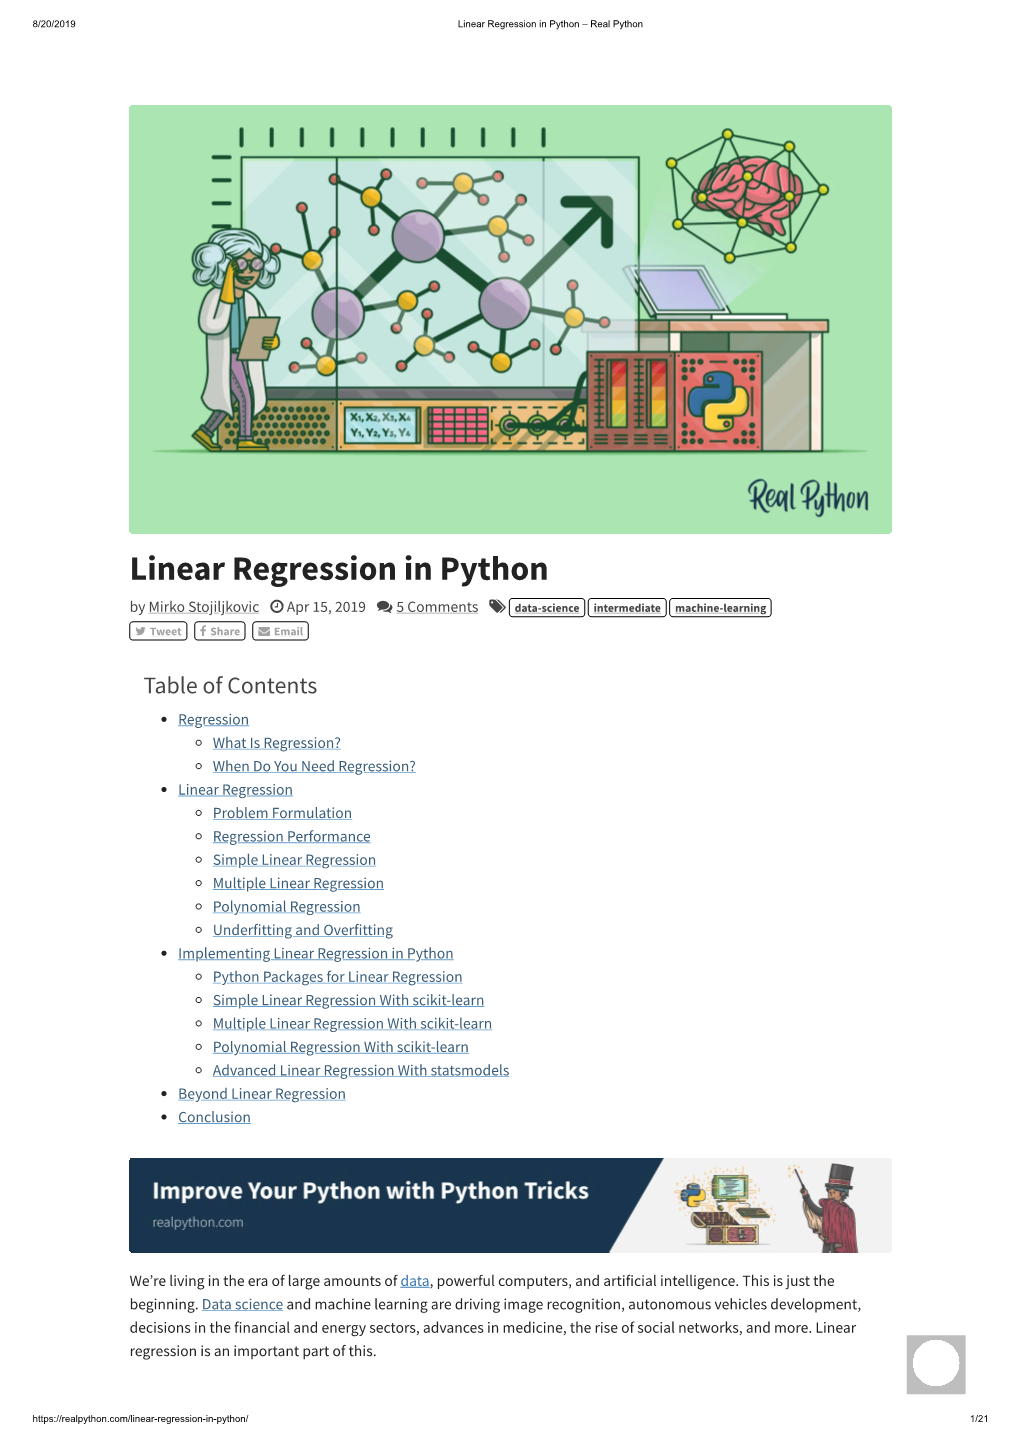 Linear Regression in Python – Real Python